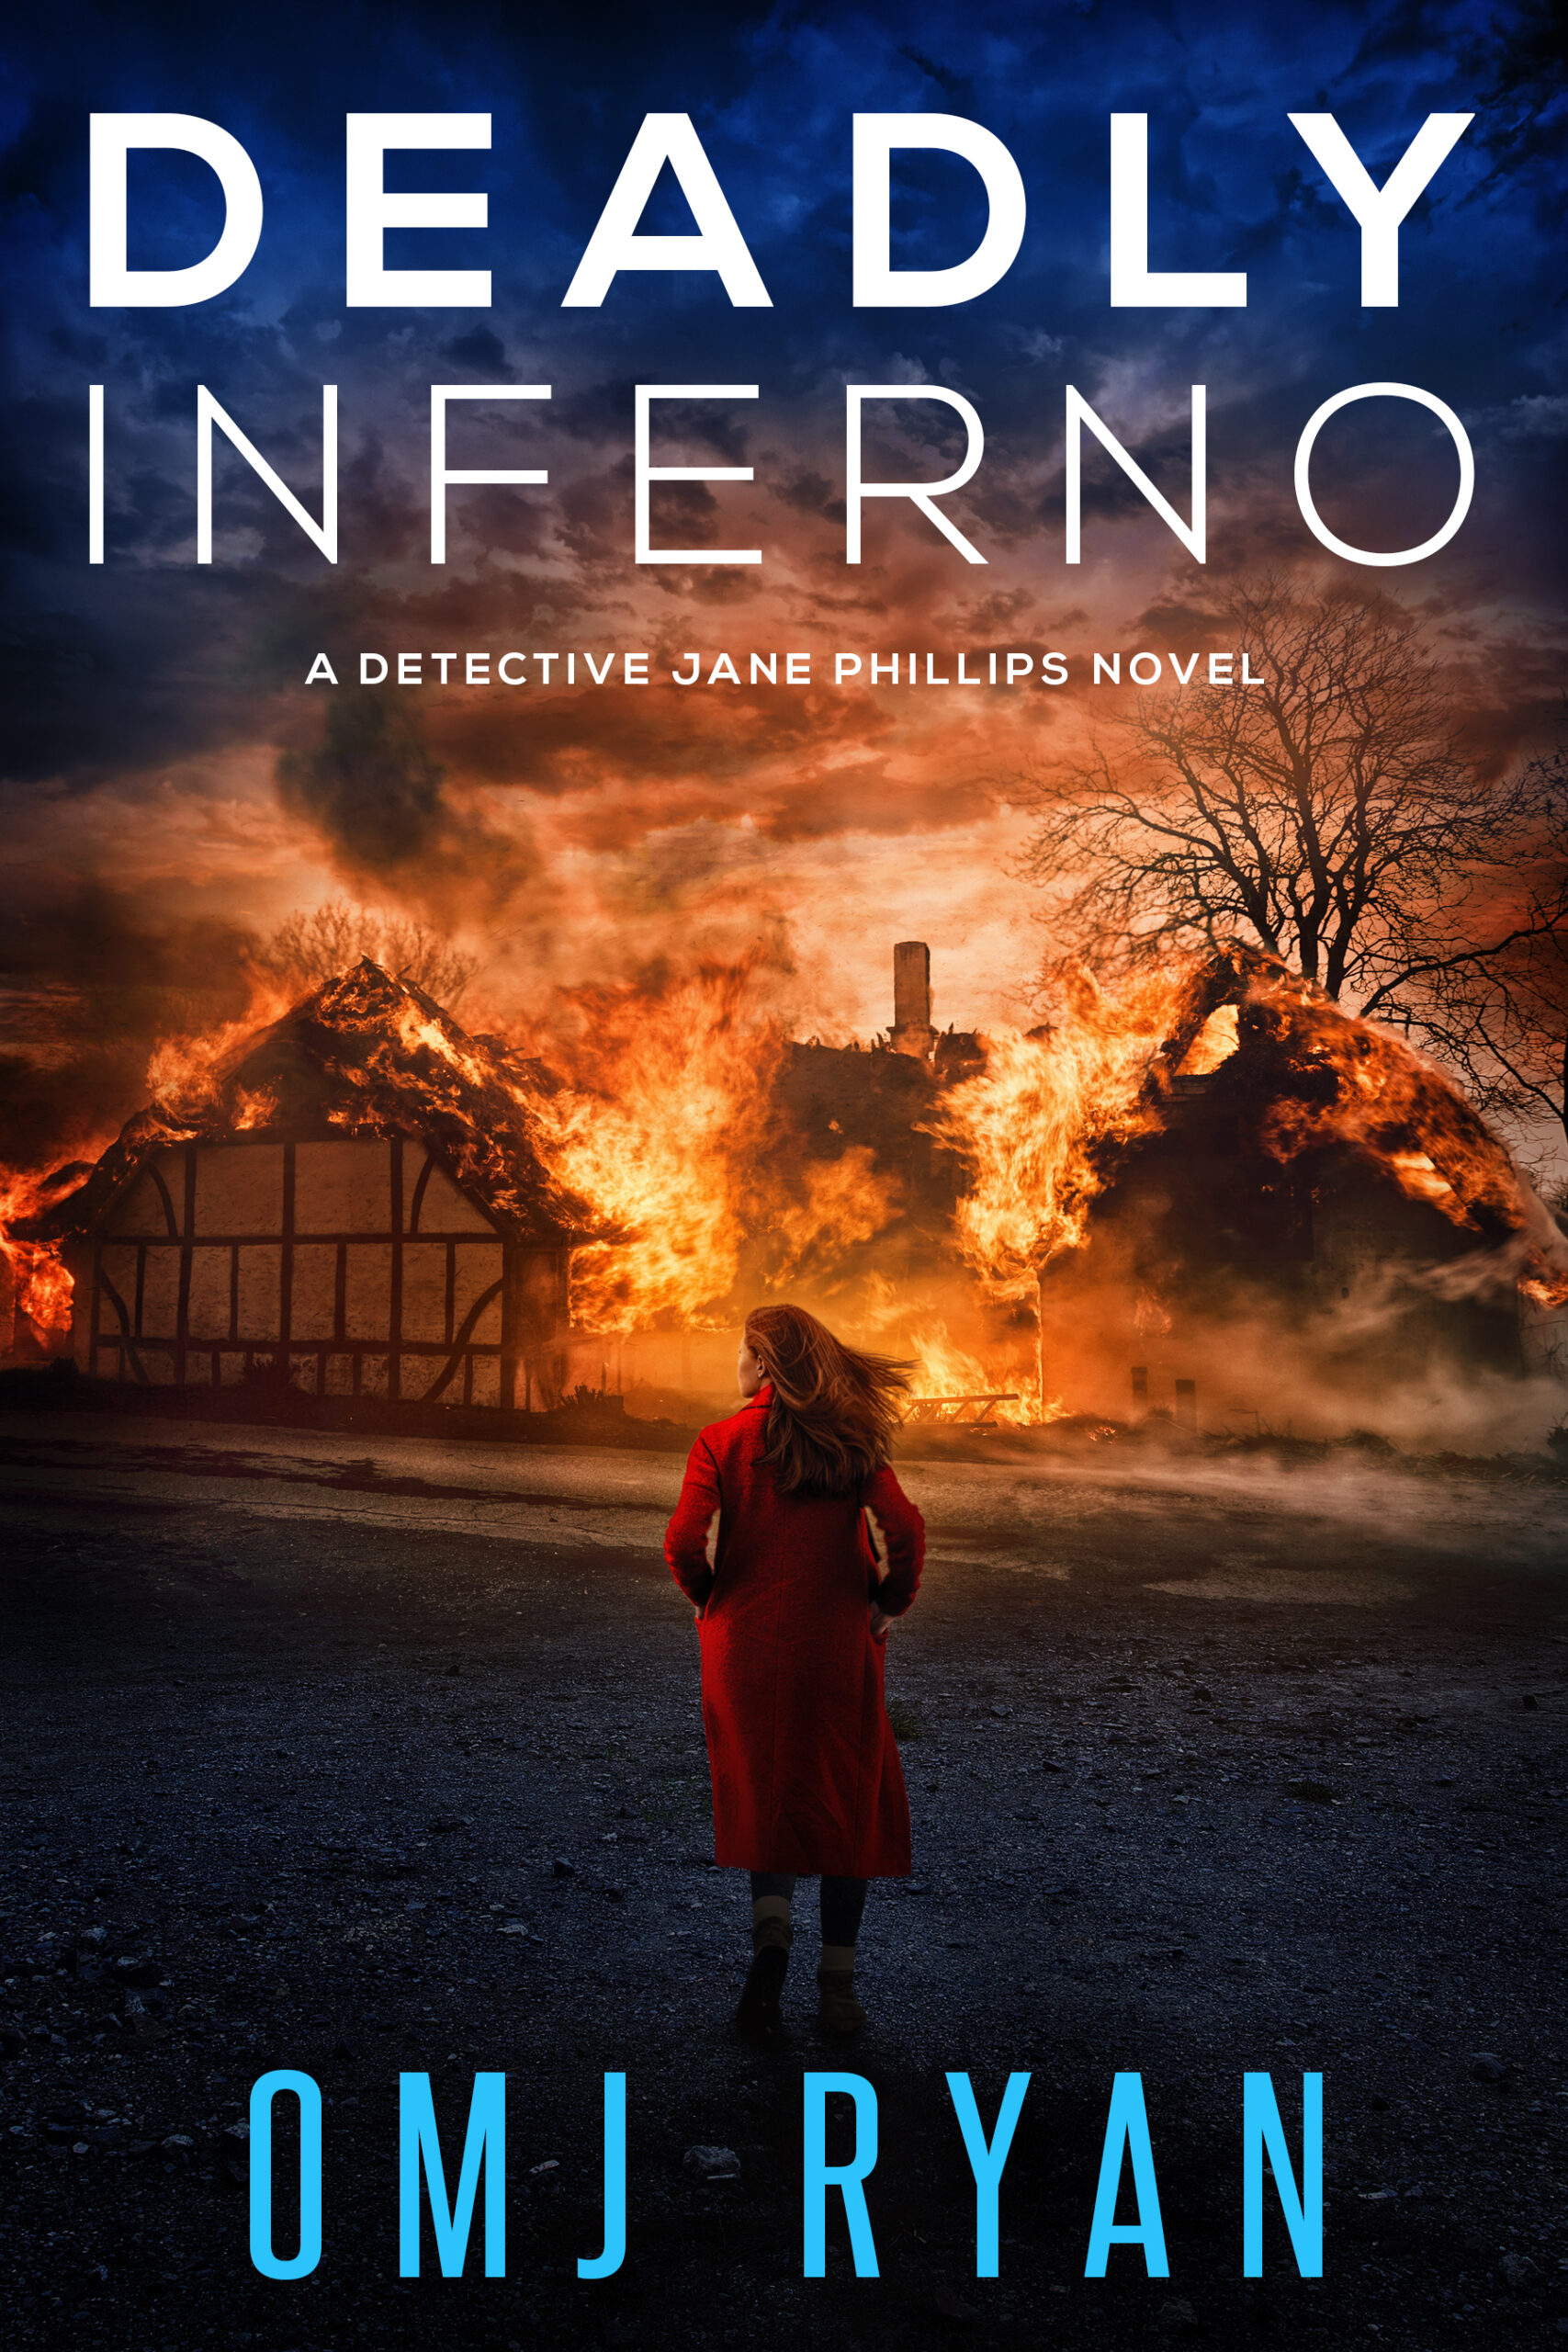 OMJ RYAN NEW RELEASE – DEADLY INFERNO